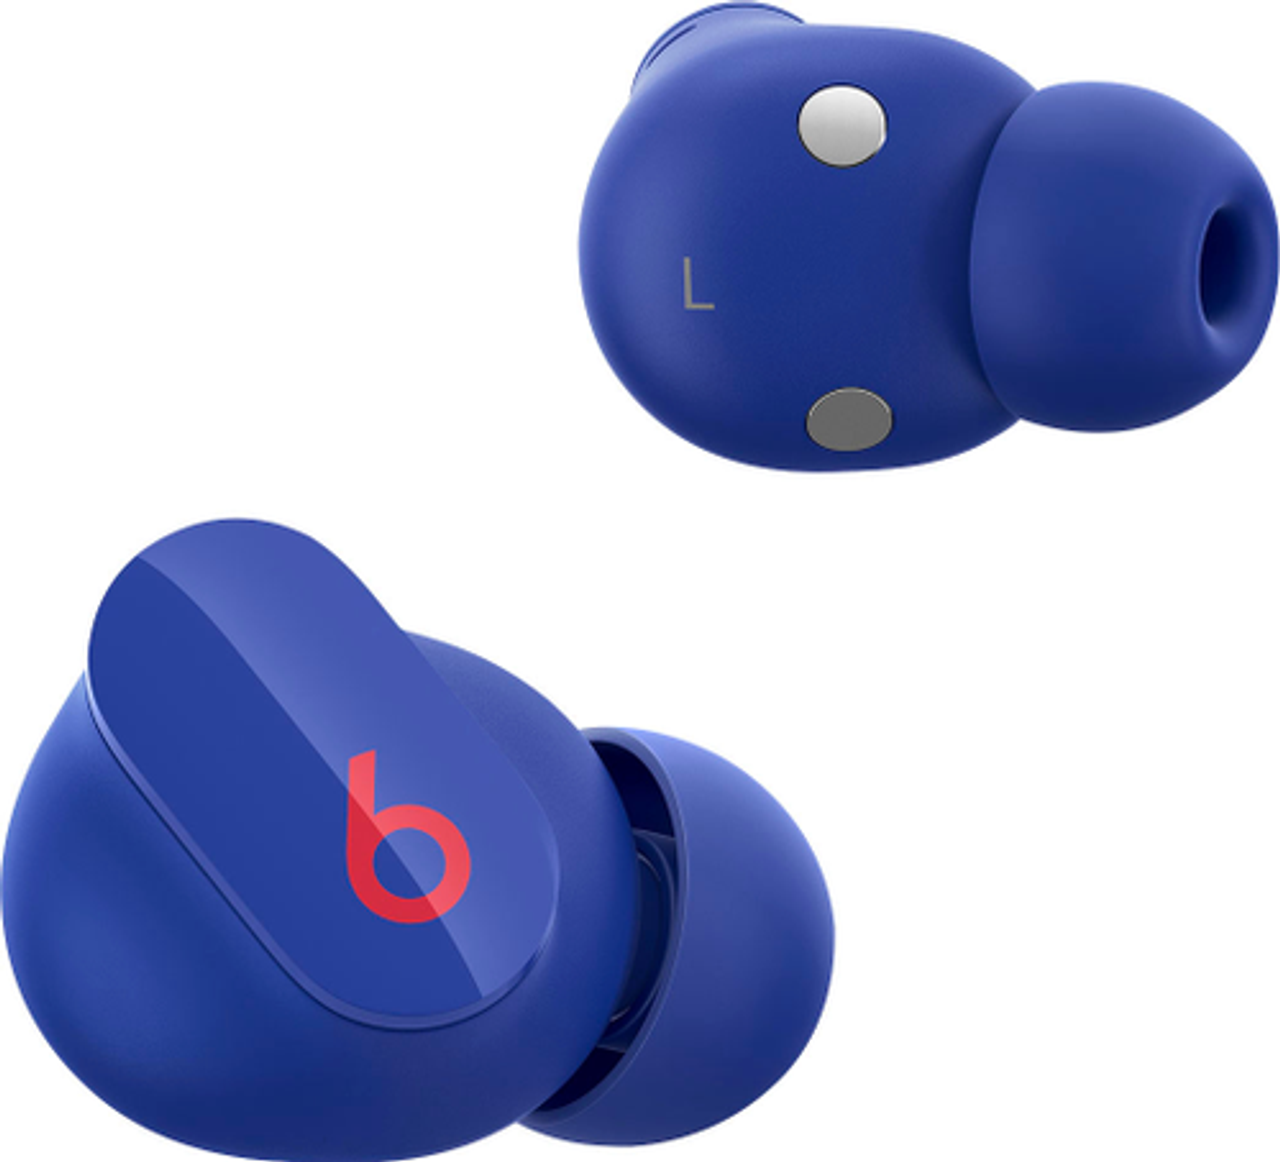 Beats by Dr. Dre - Geek Squad Certified Refurbished Beats Studio Buds Totally Wireless Noise Cancelling Earbuds - Ocean Blue